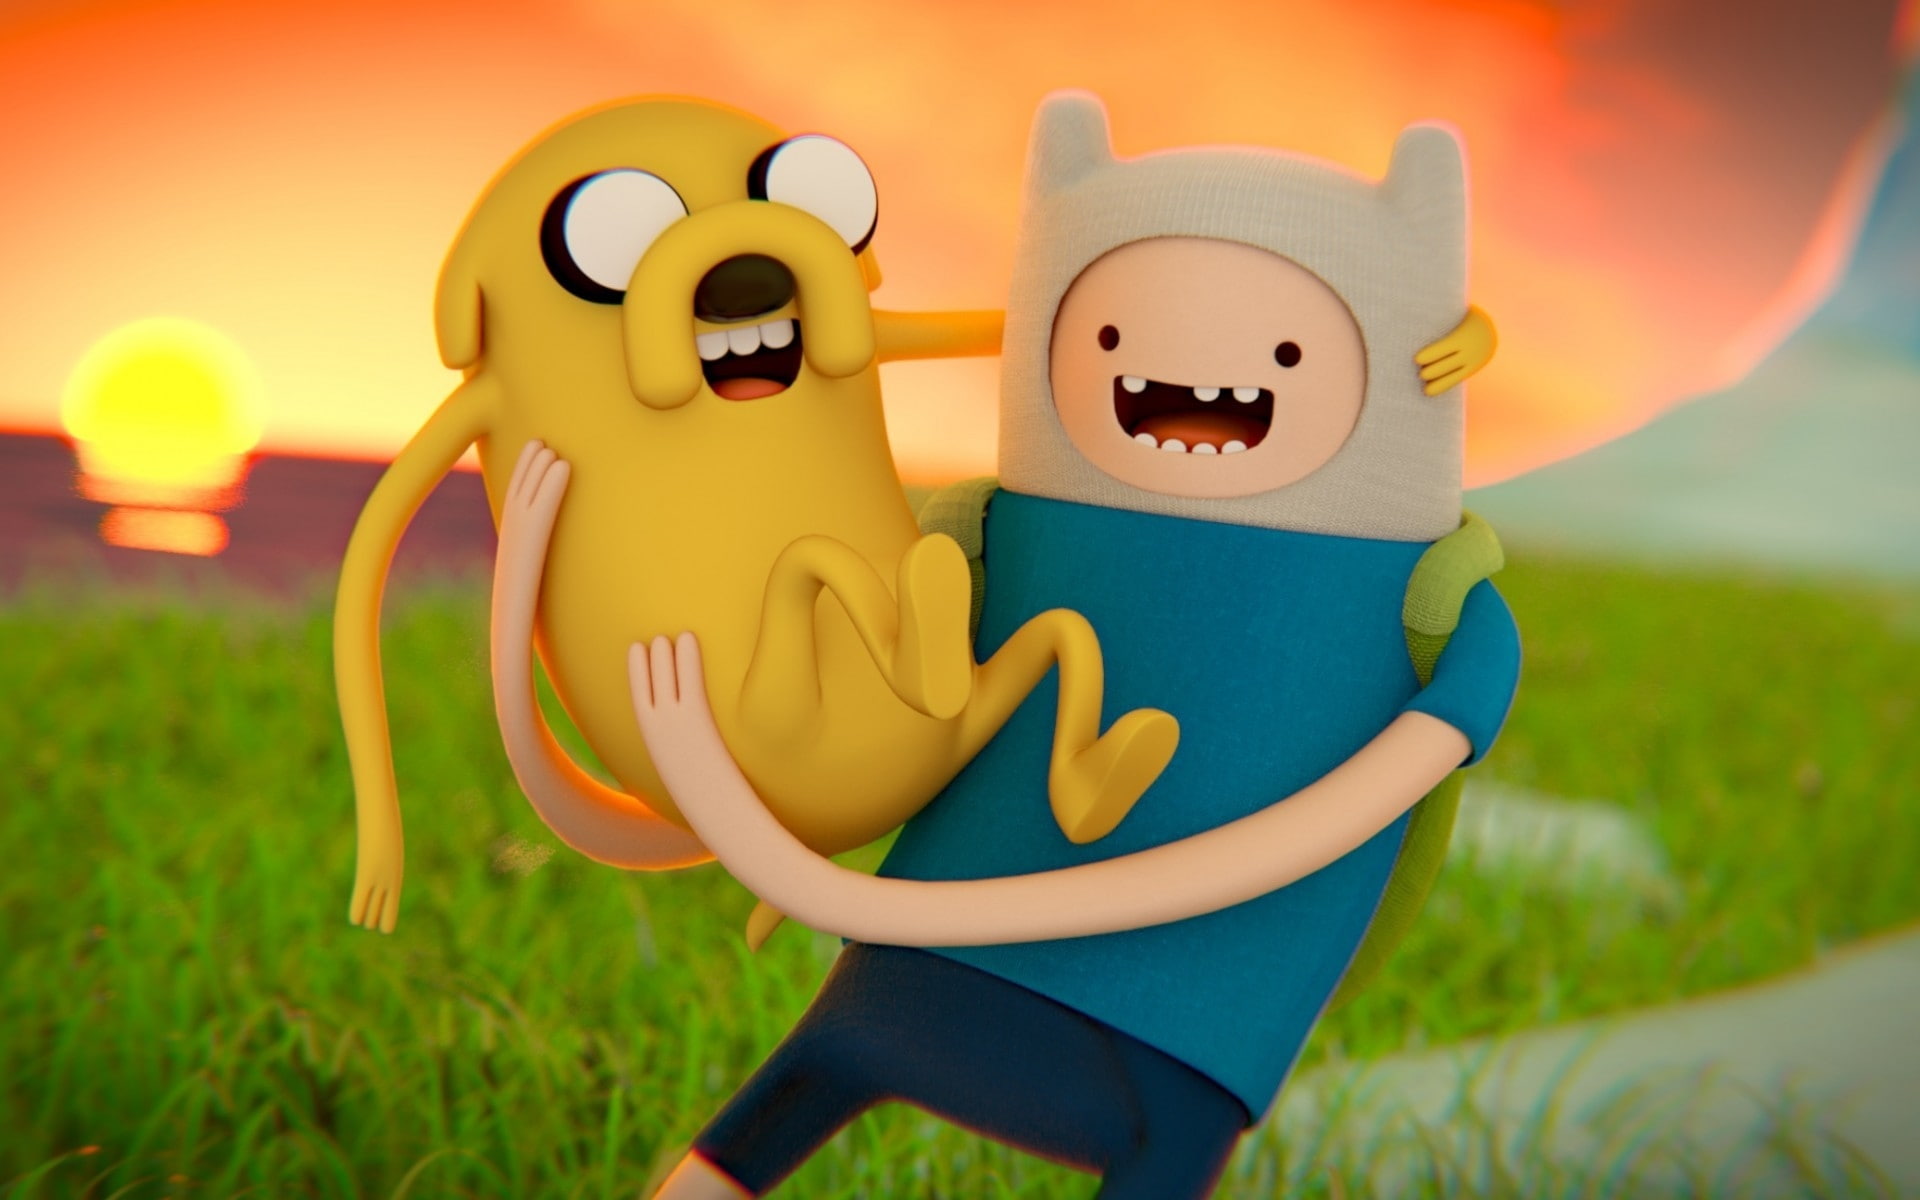 Adventure Time Cool Poster, finn the human and jake the dog character